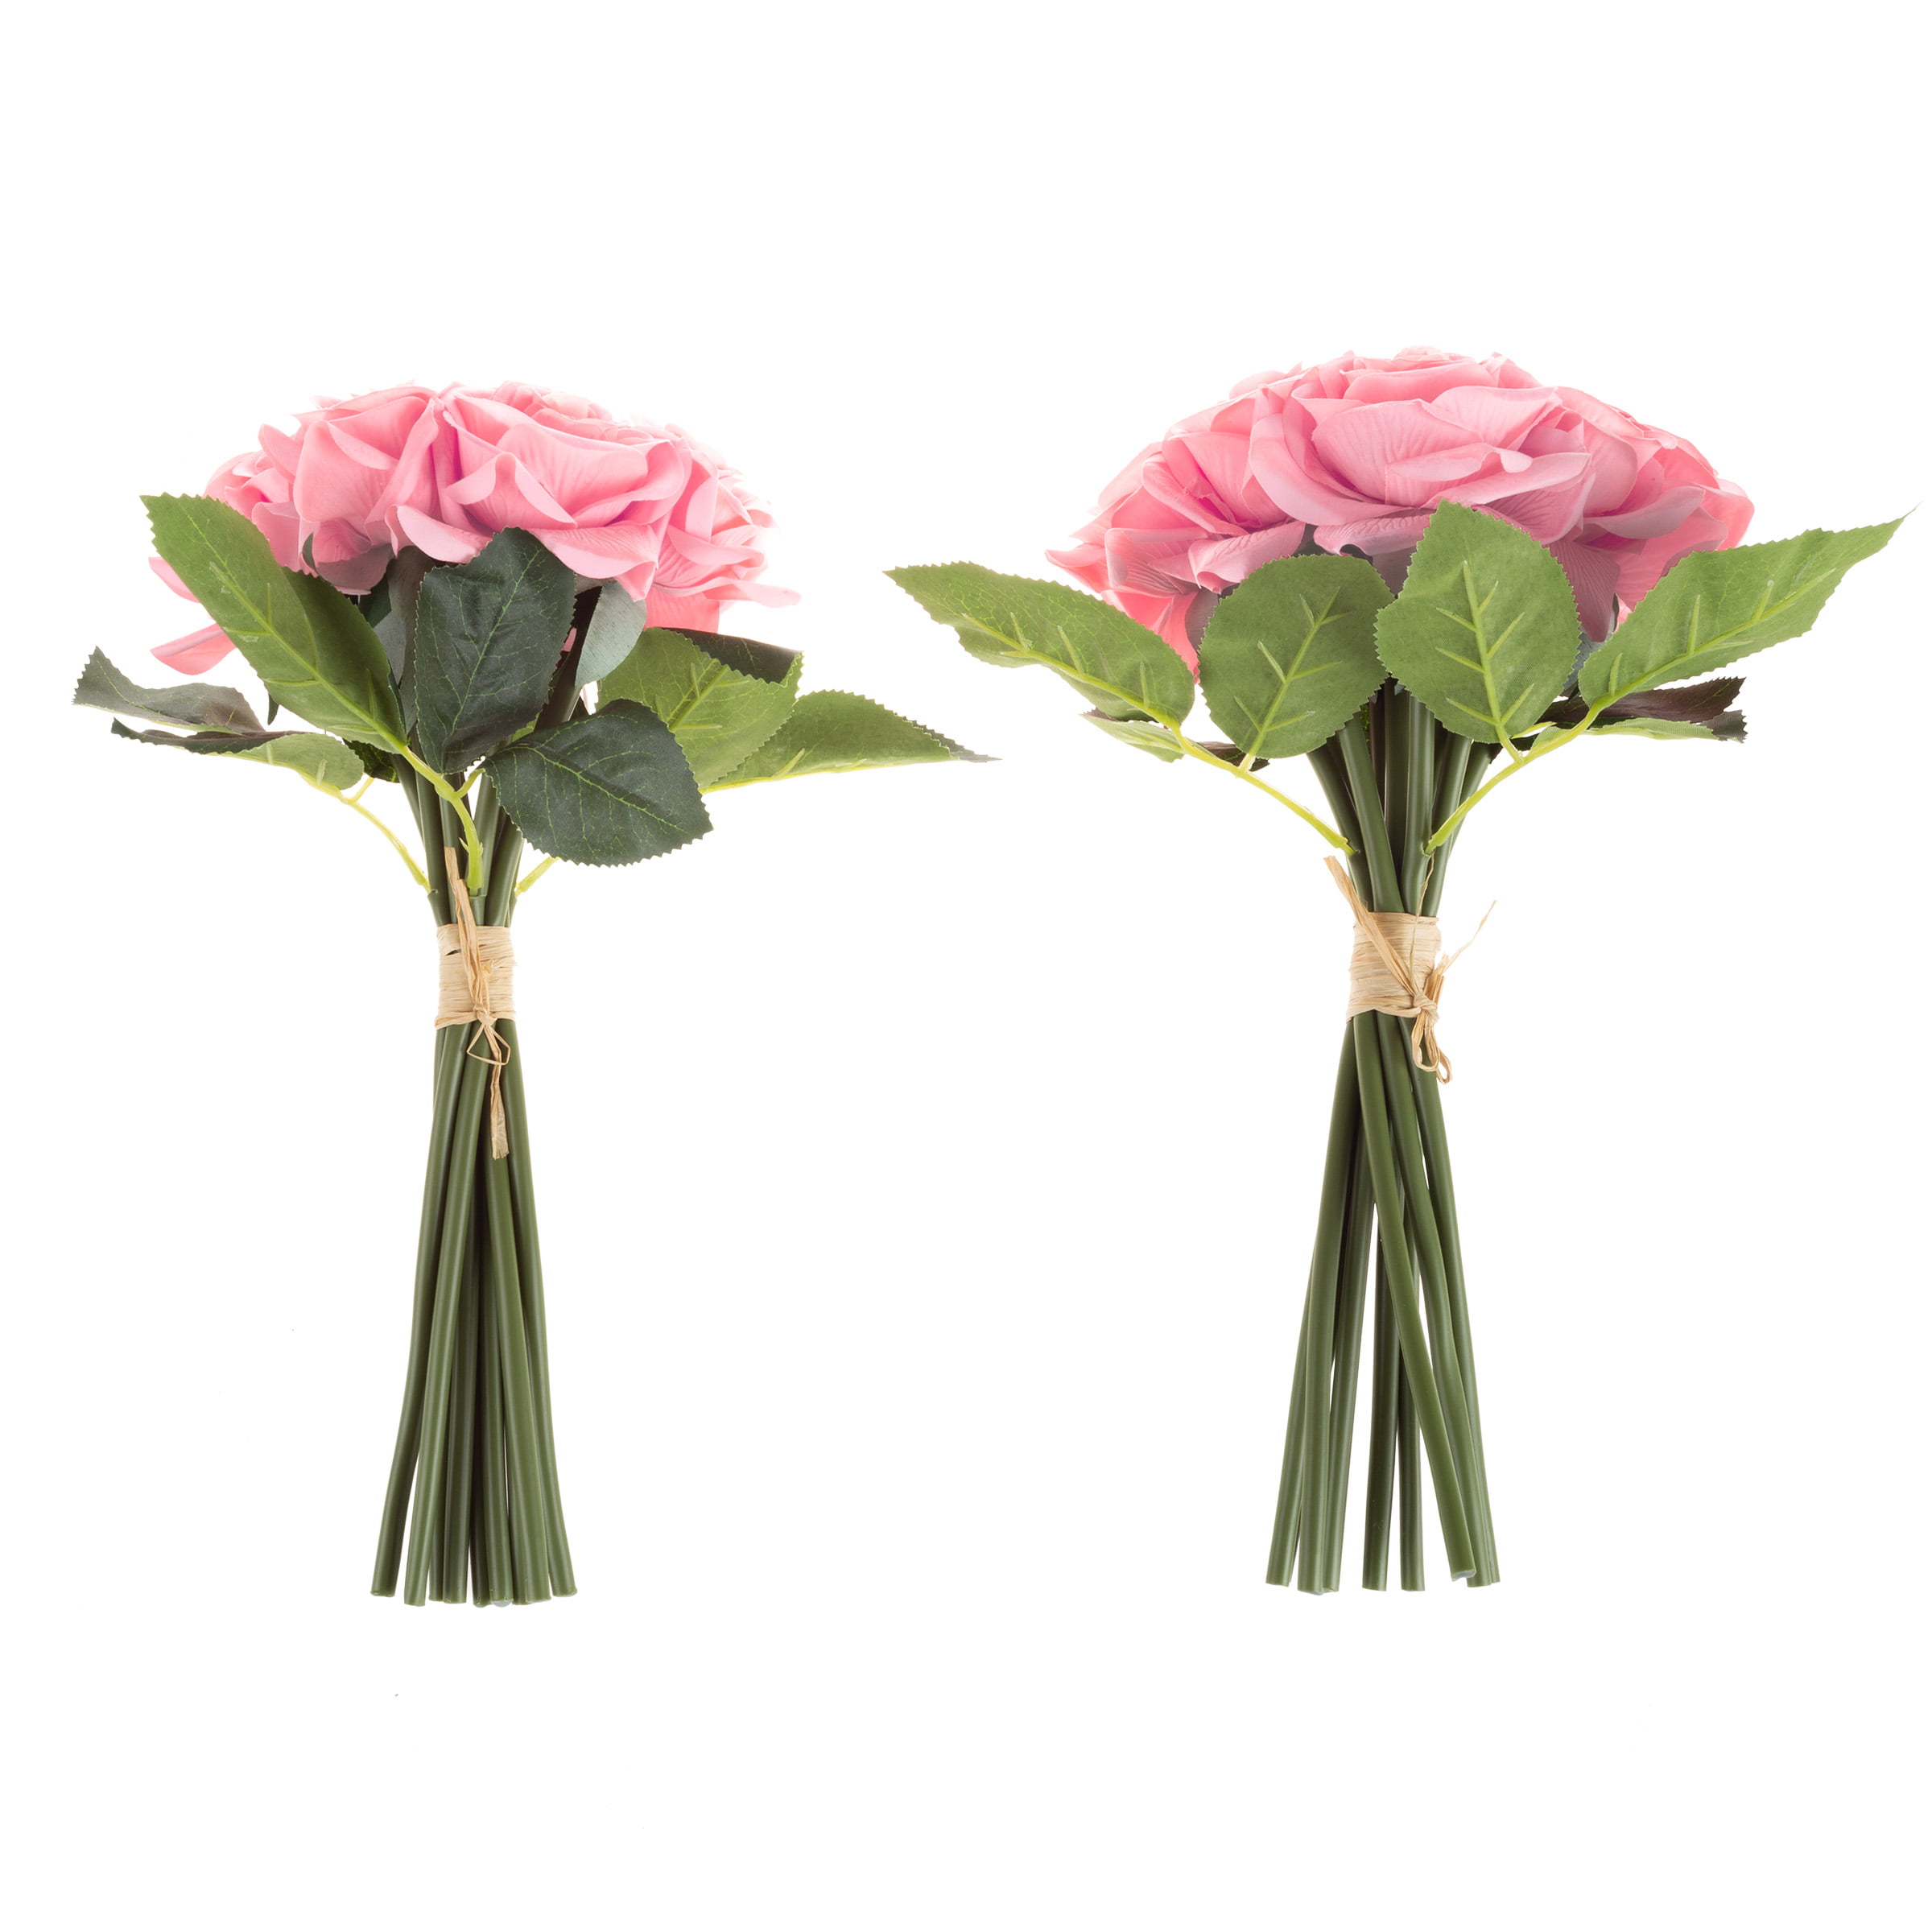  Northlight Set of 6 Real Touch Artificial Rose Stems, 26,  Light Pink : Home & Kitchen